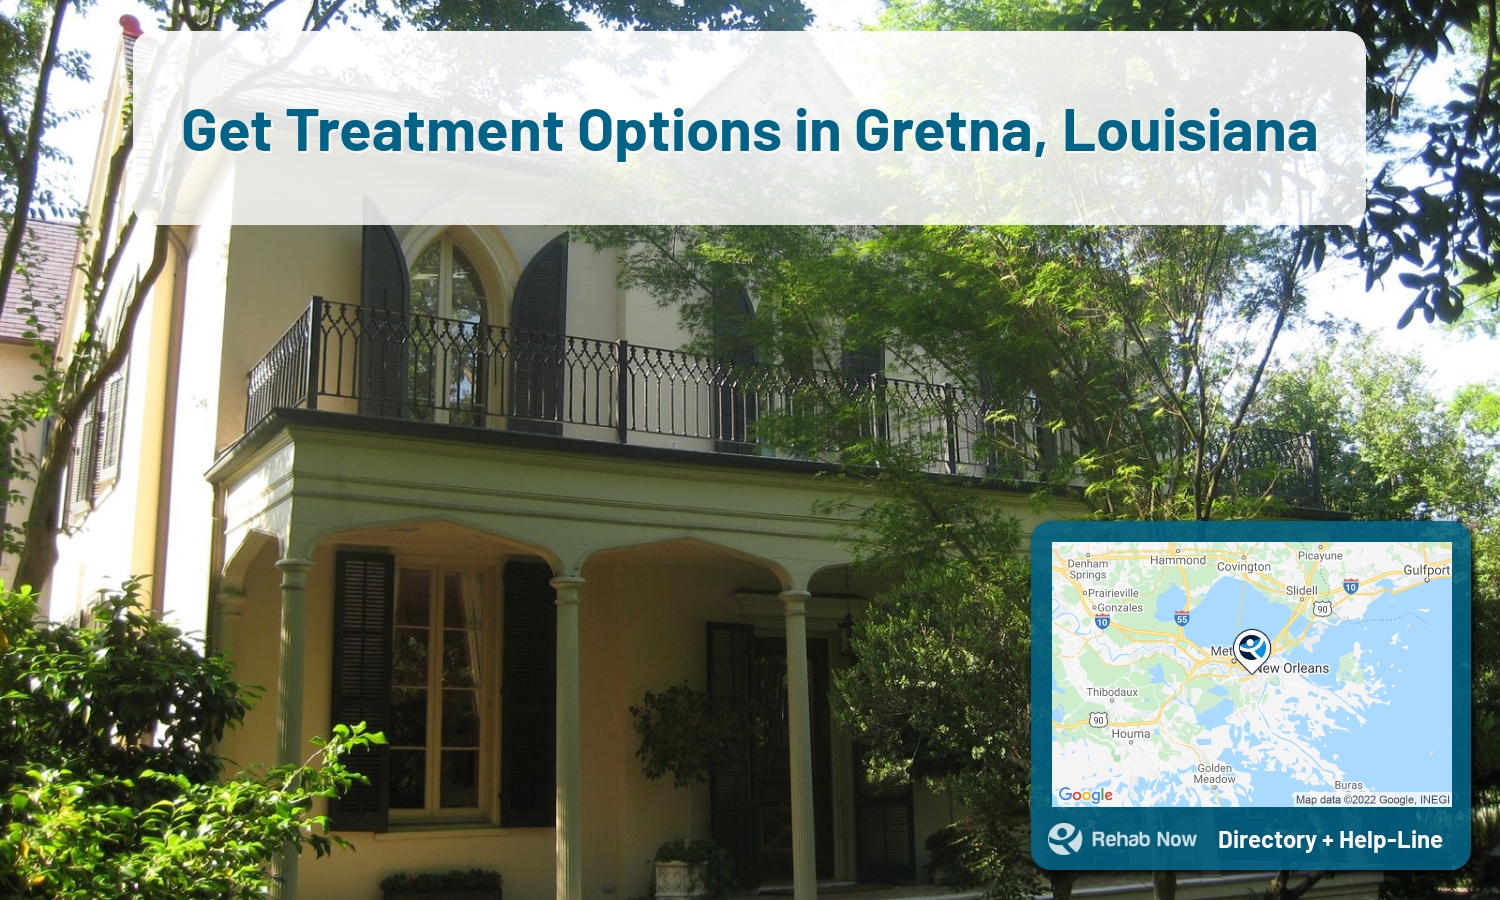 Find drug rehab and alcohol treatment services in Gretna. Our experts help you find a center in Gretna, Louisiana